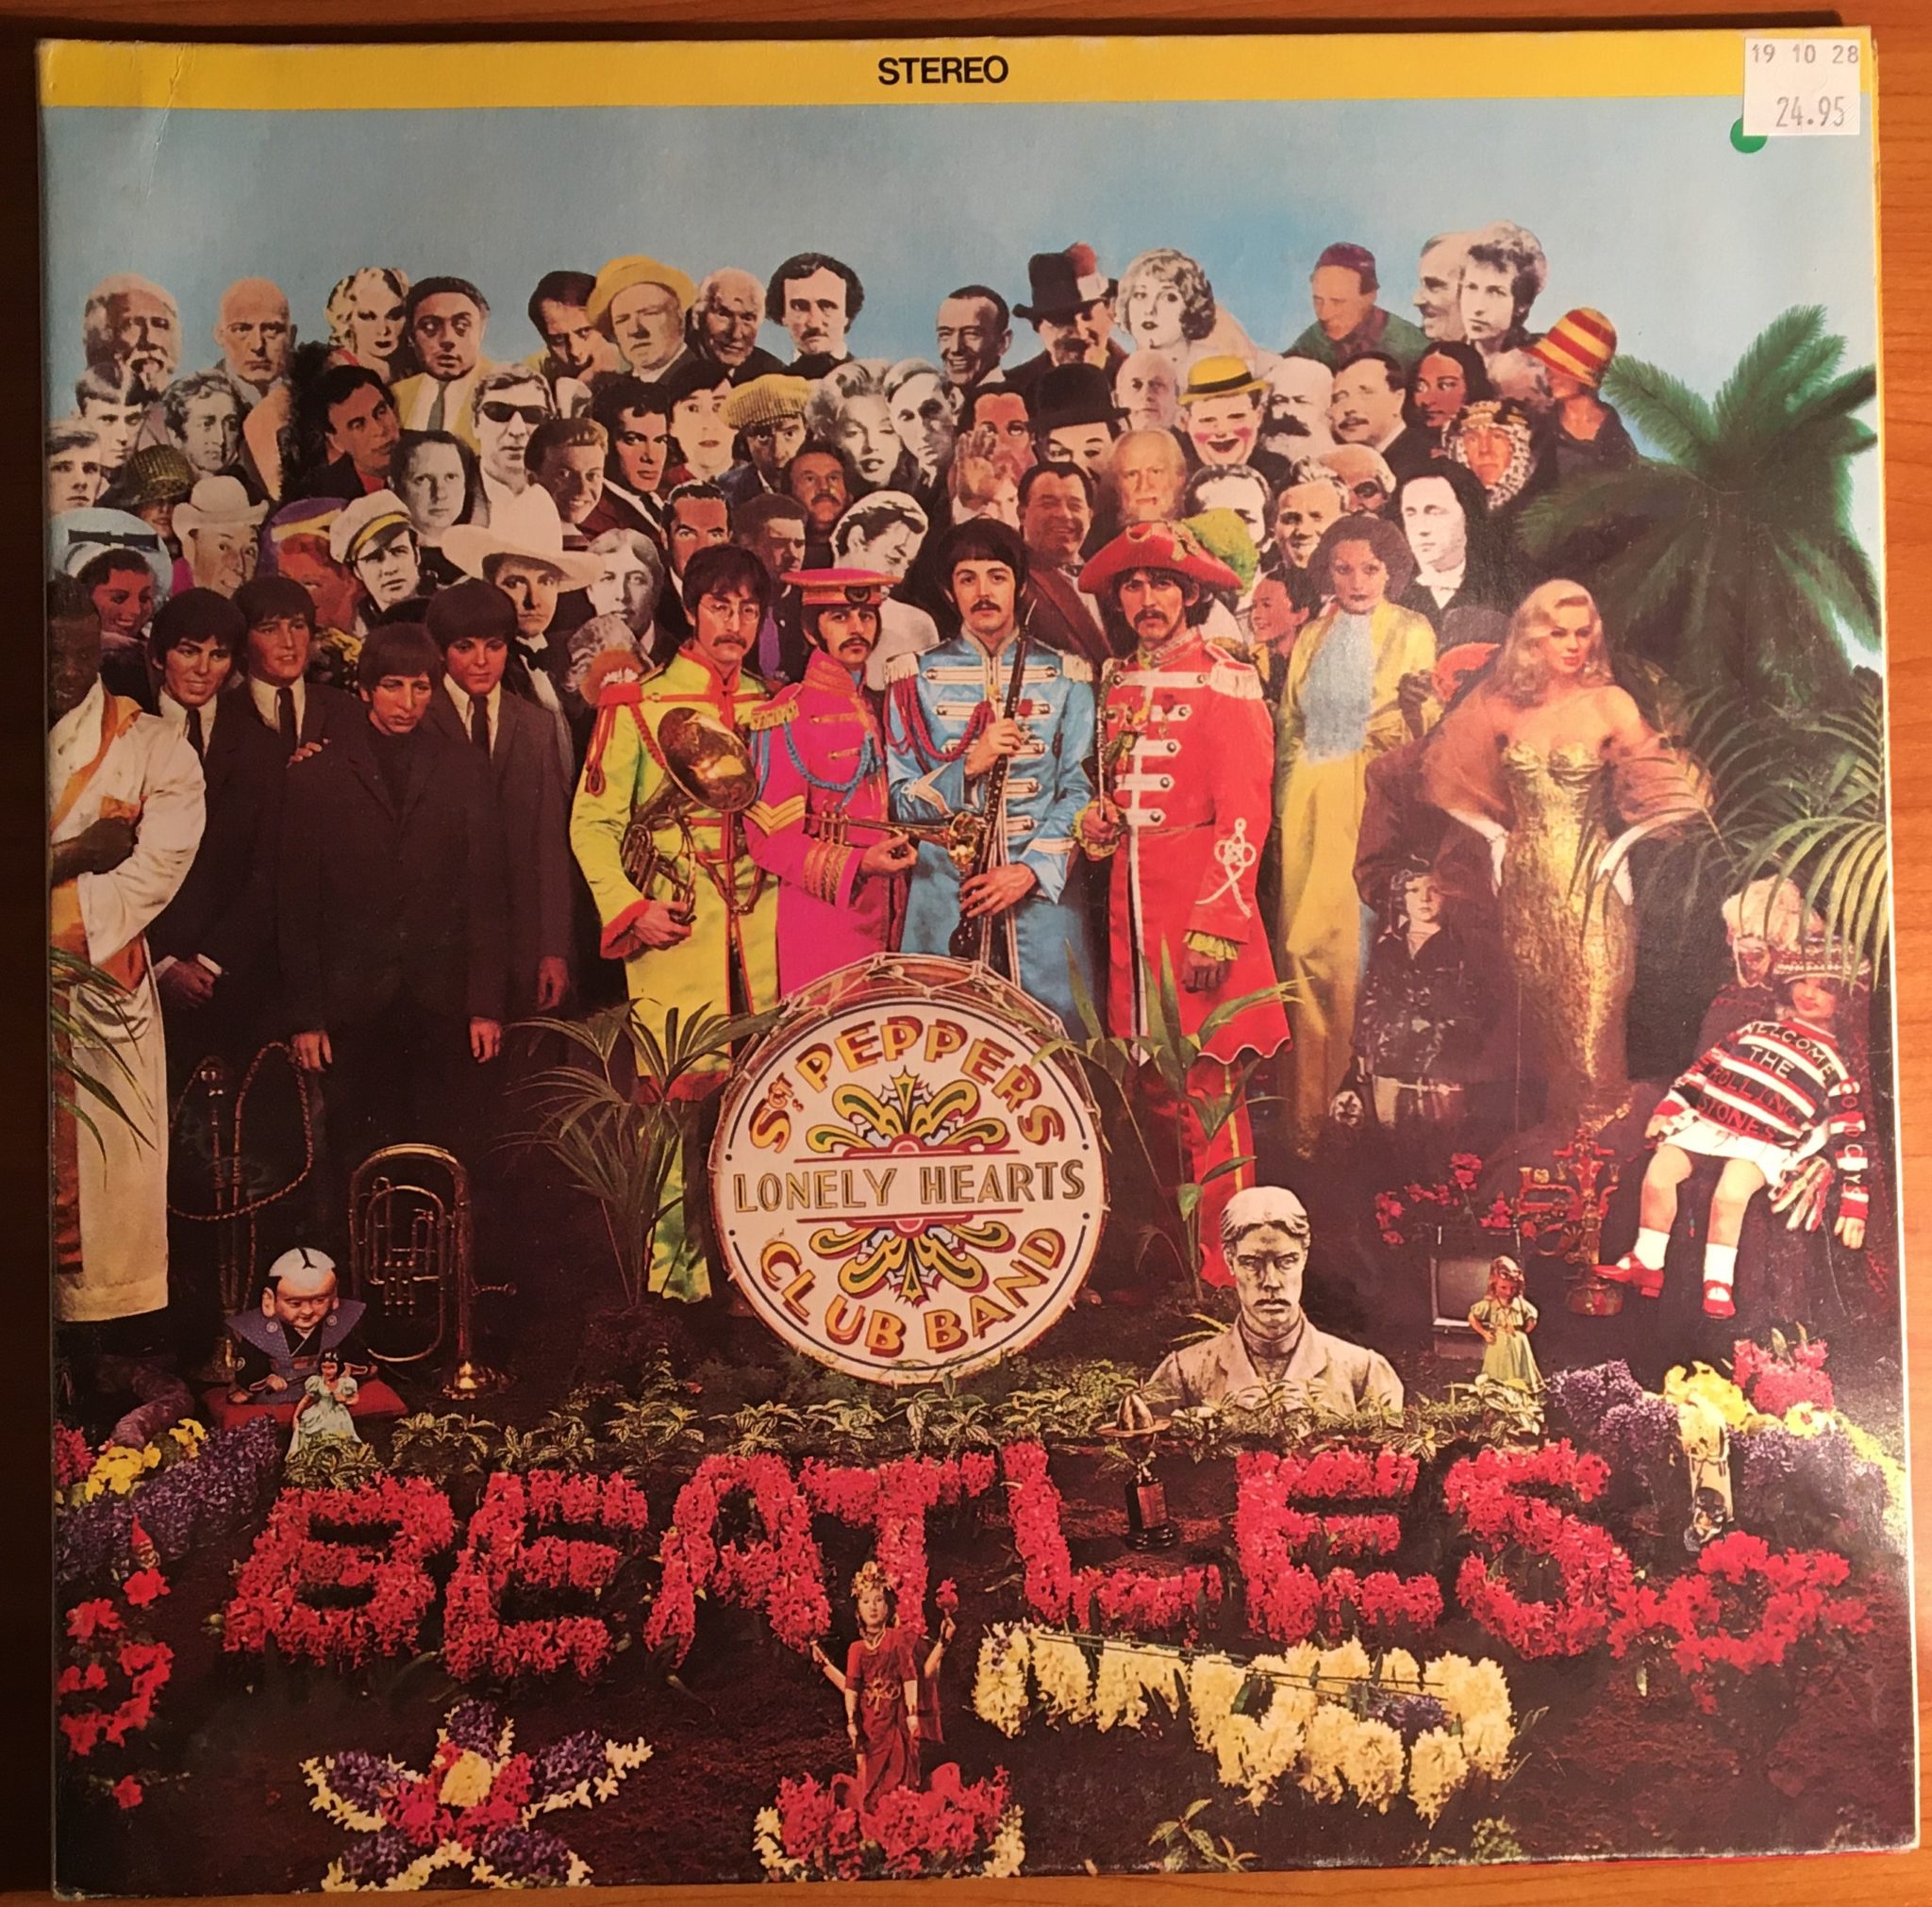 BEATLES, The “Sgt. Pepper's Lonely Hearts Club Band” Vintage LP 